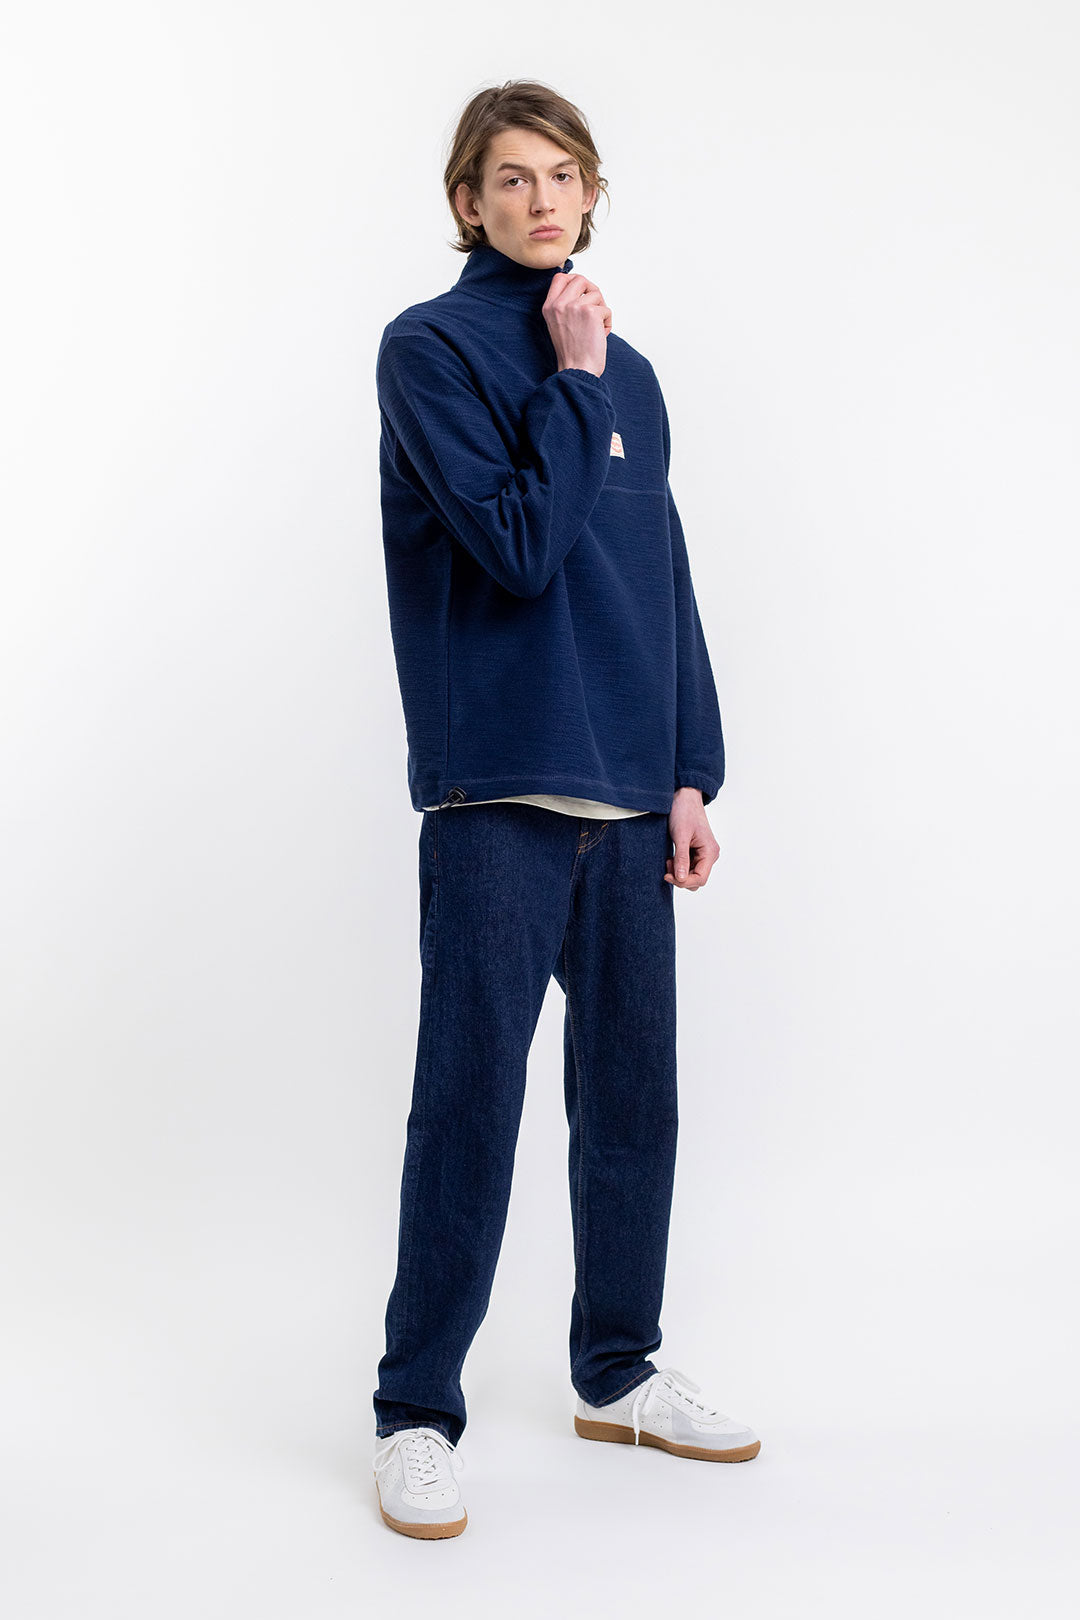 Dark blue zip-up sweatshirt Divided 100% cotton from Rotholz